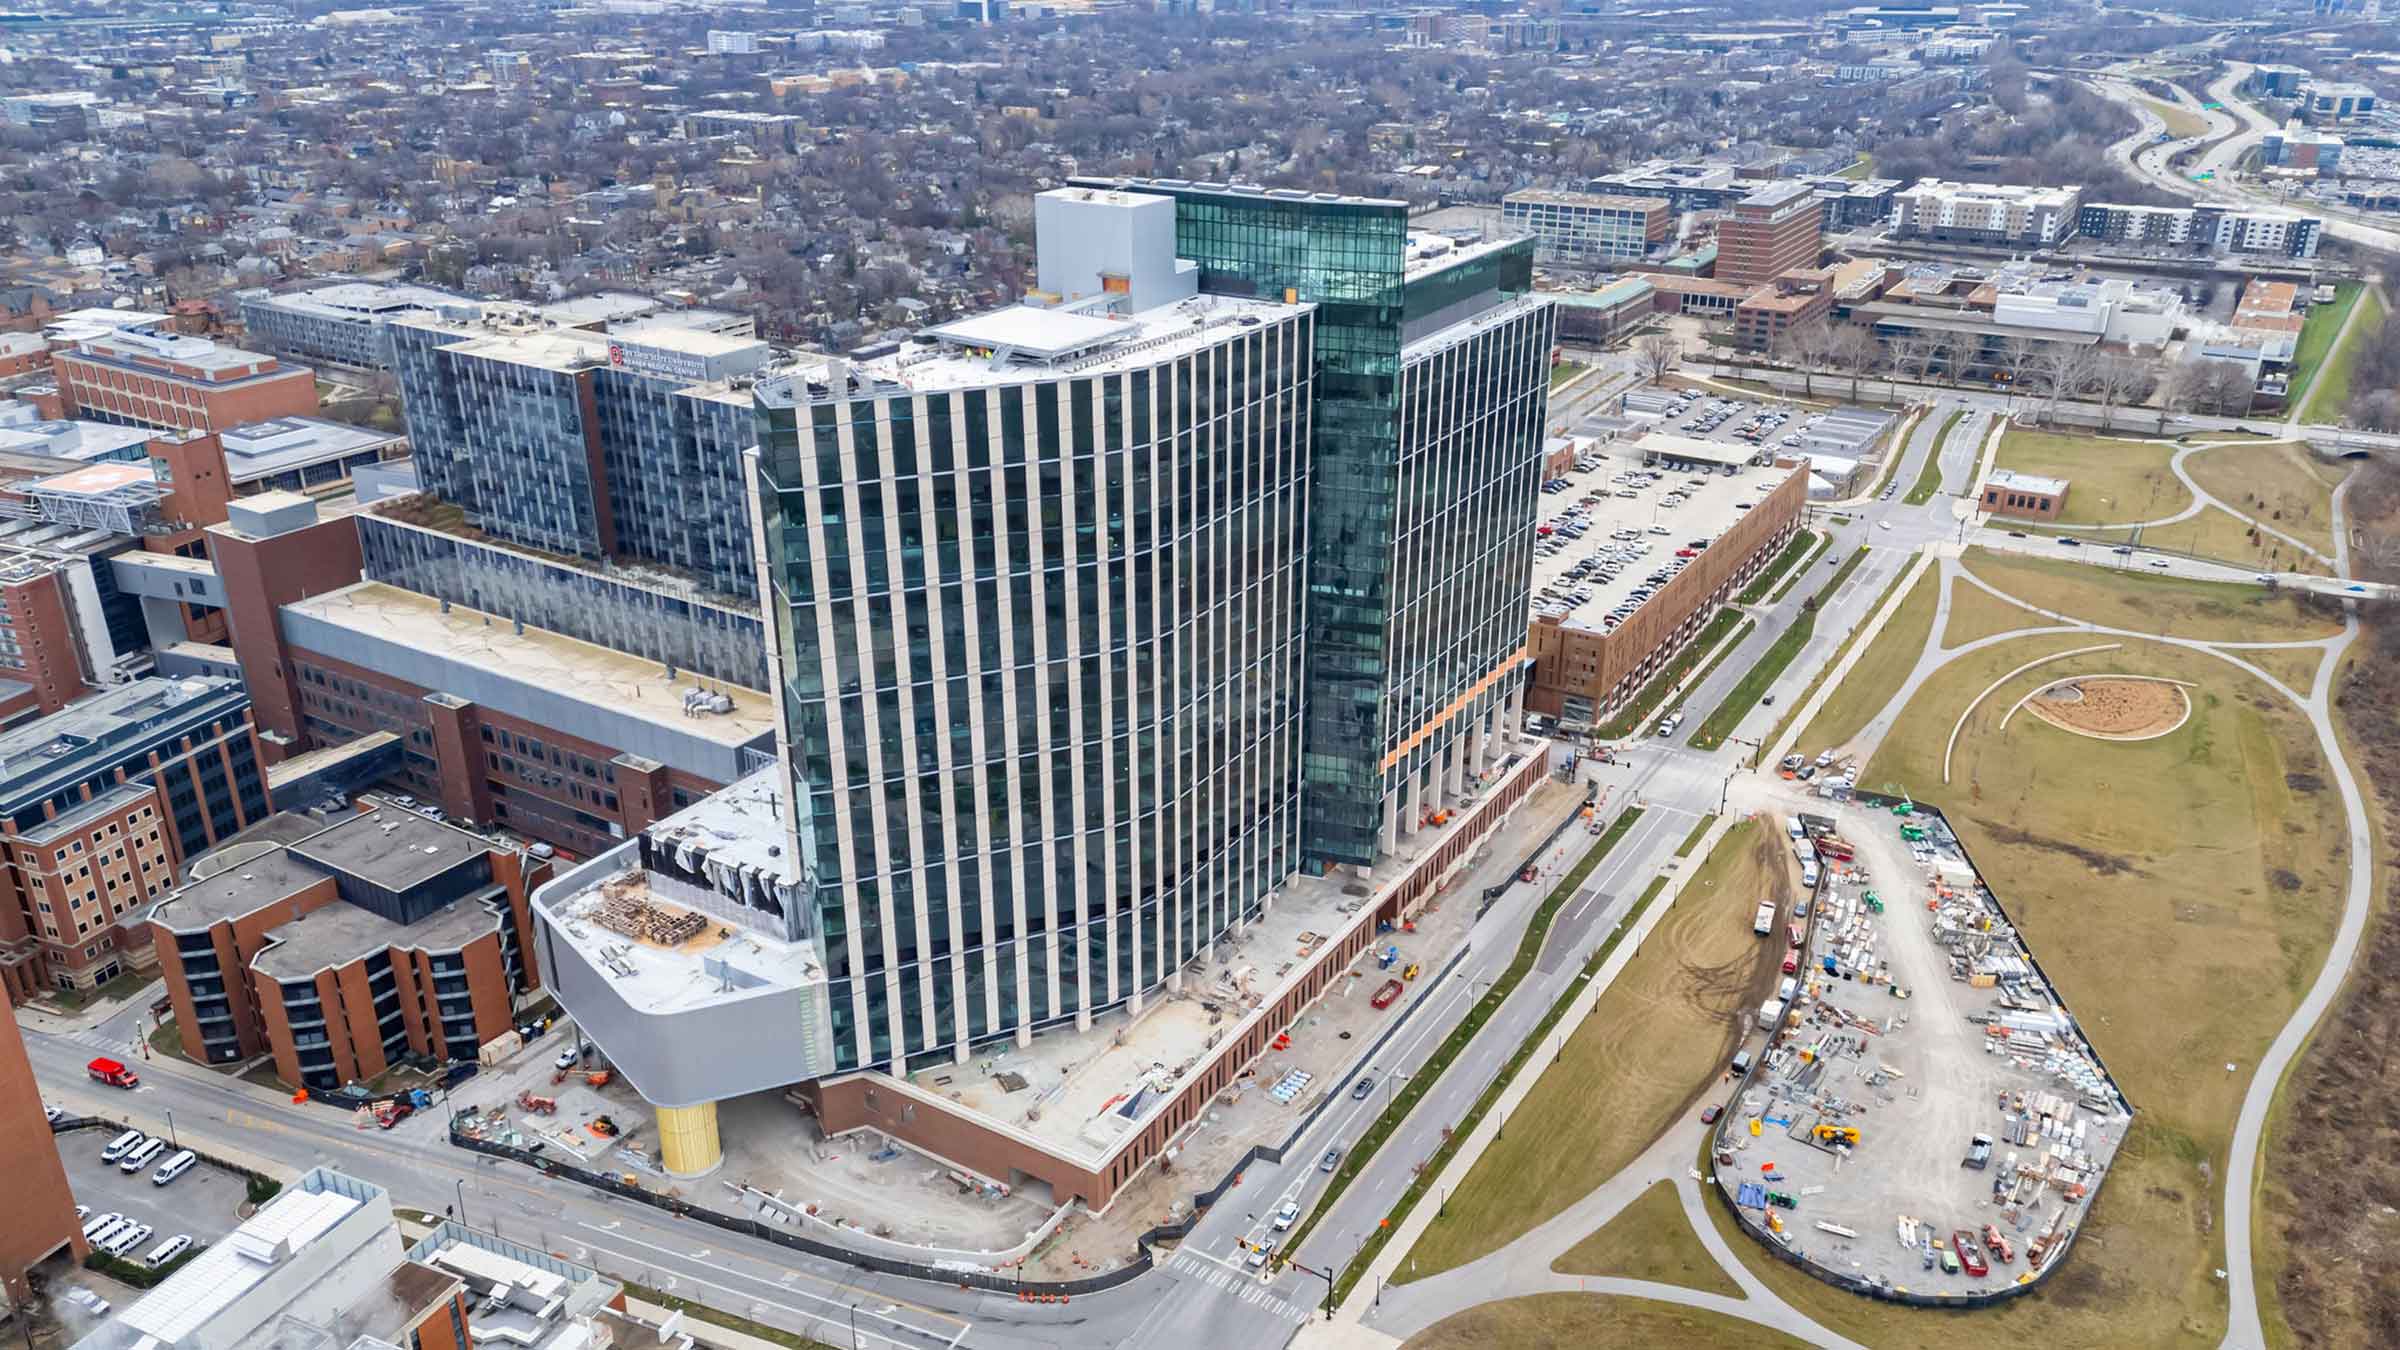 Ohio State’s new inpatient tower during construction